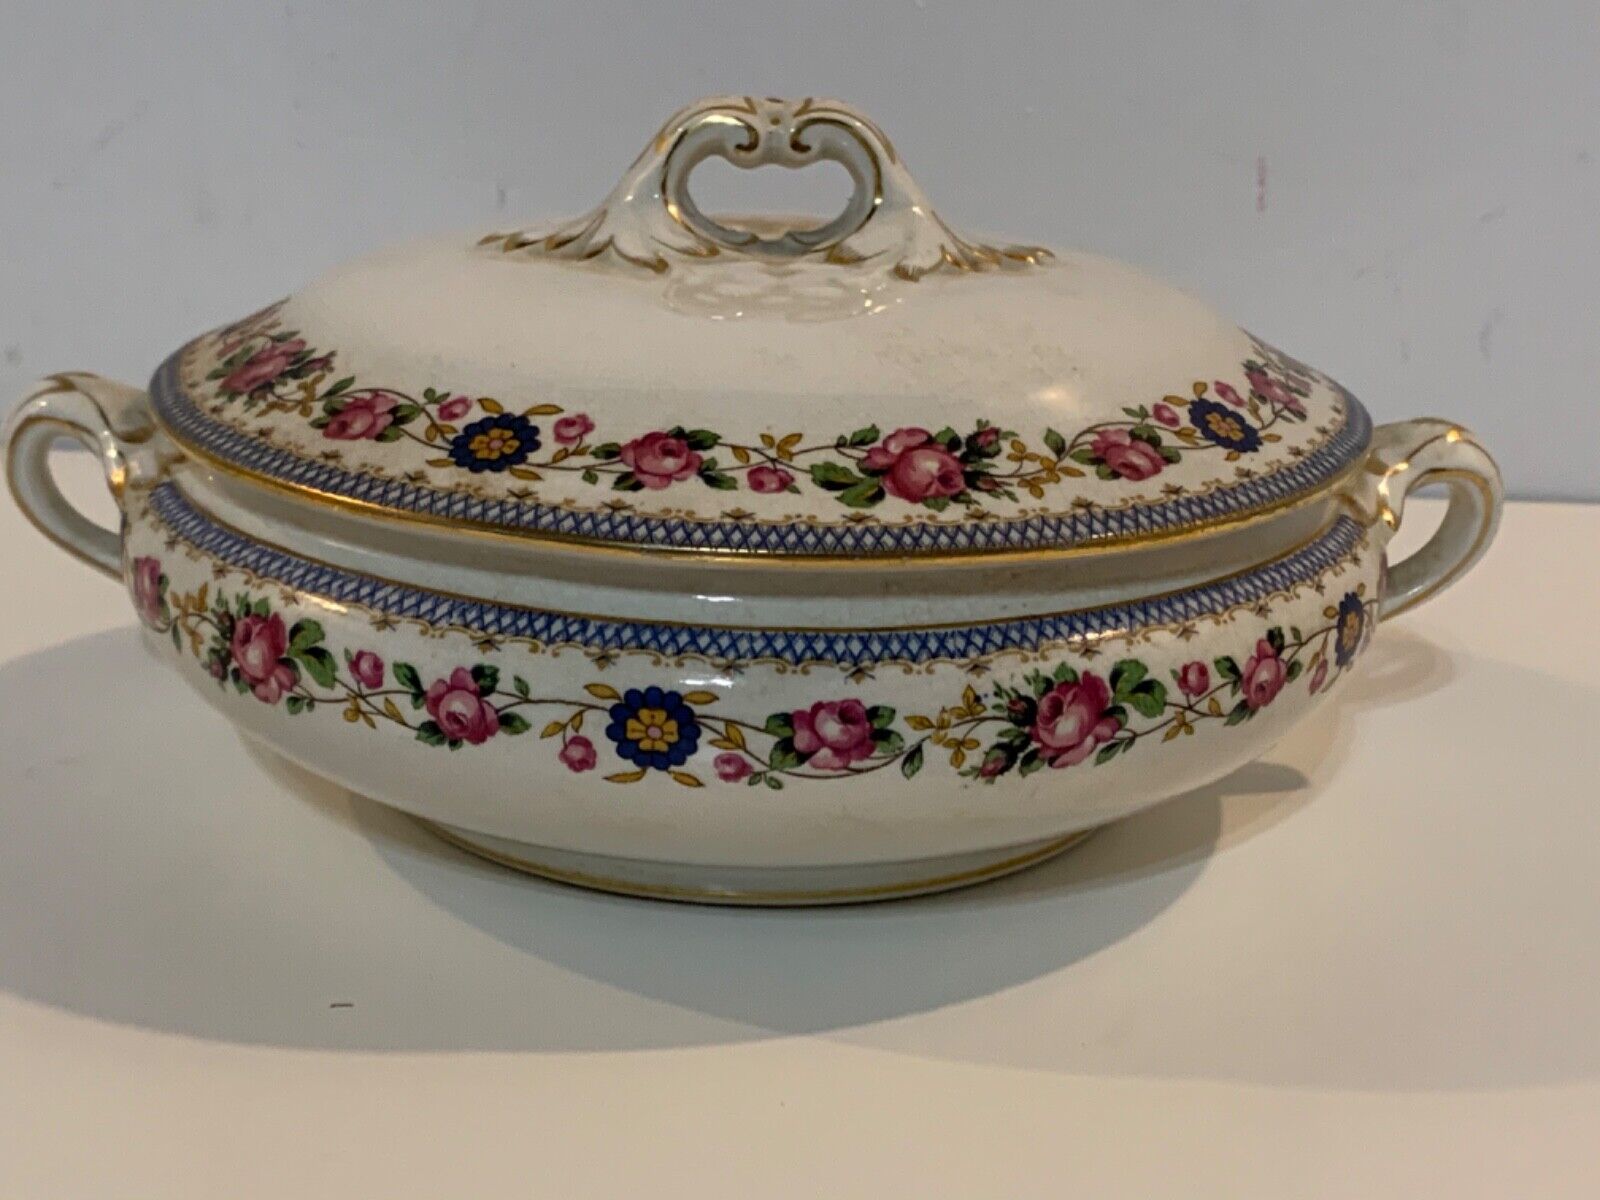 Antique Booths Staffordshire Porcelain Covered Tureen with Rose Floral Dec.